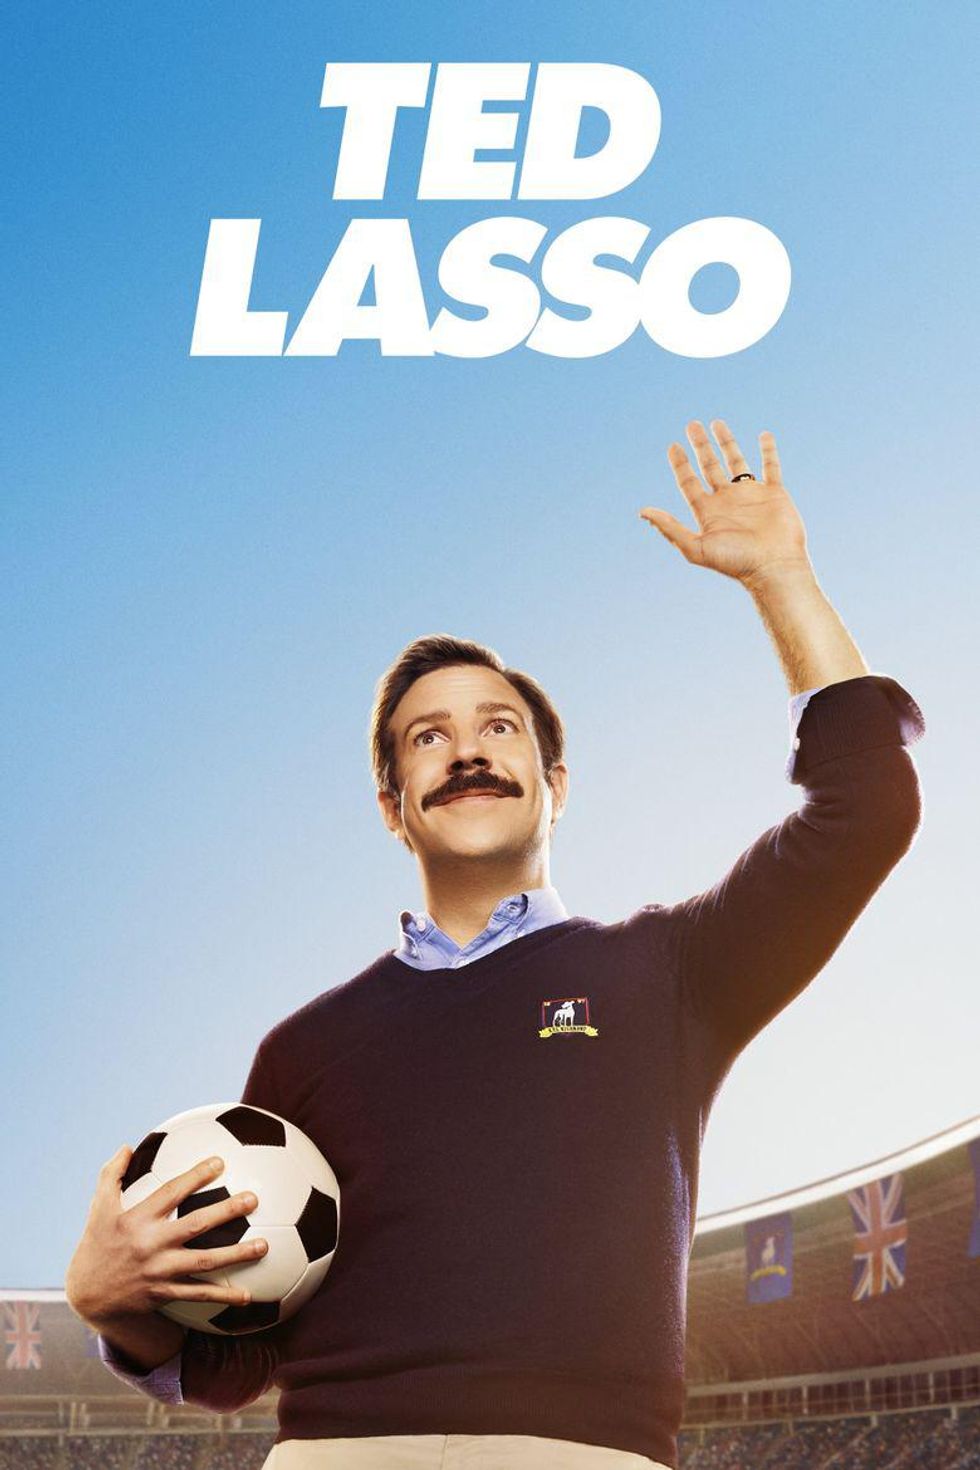 Right Now, We All Need A Little Ted Lasso